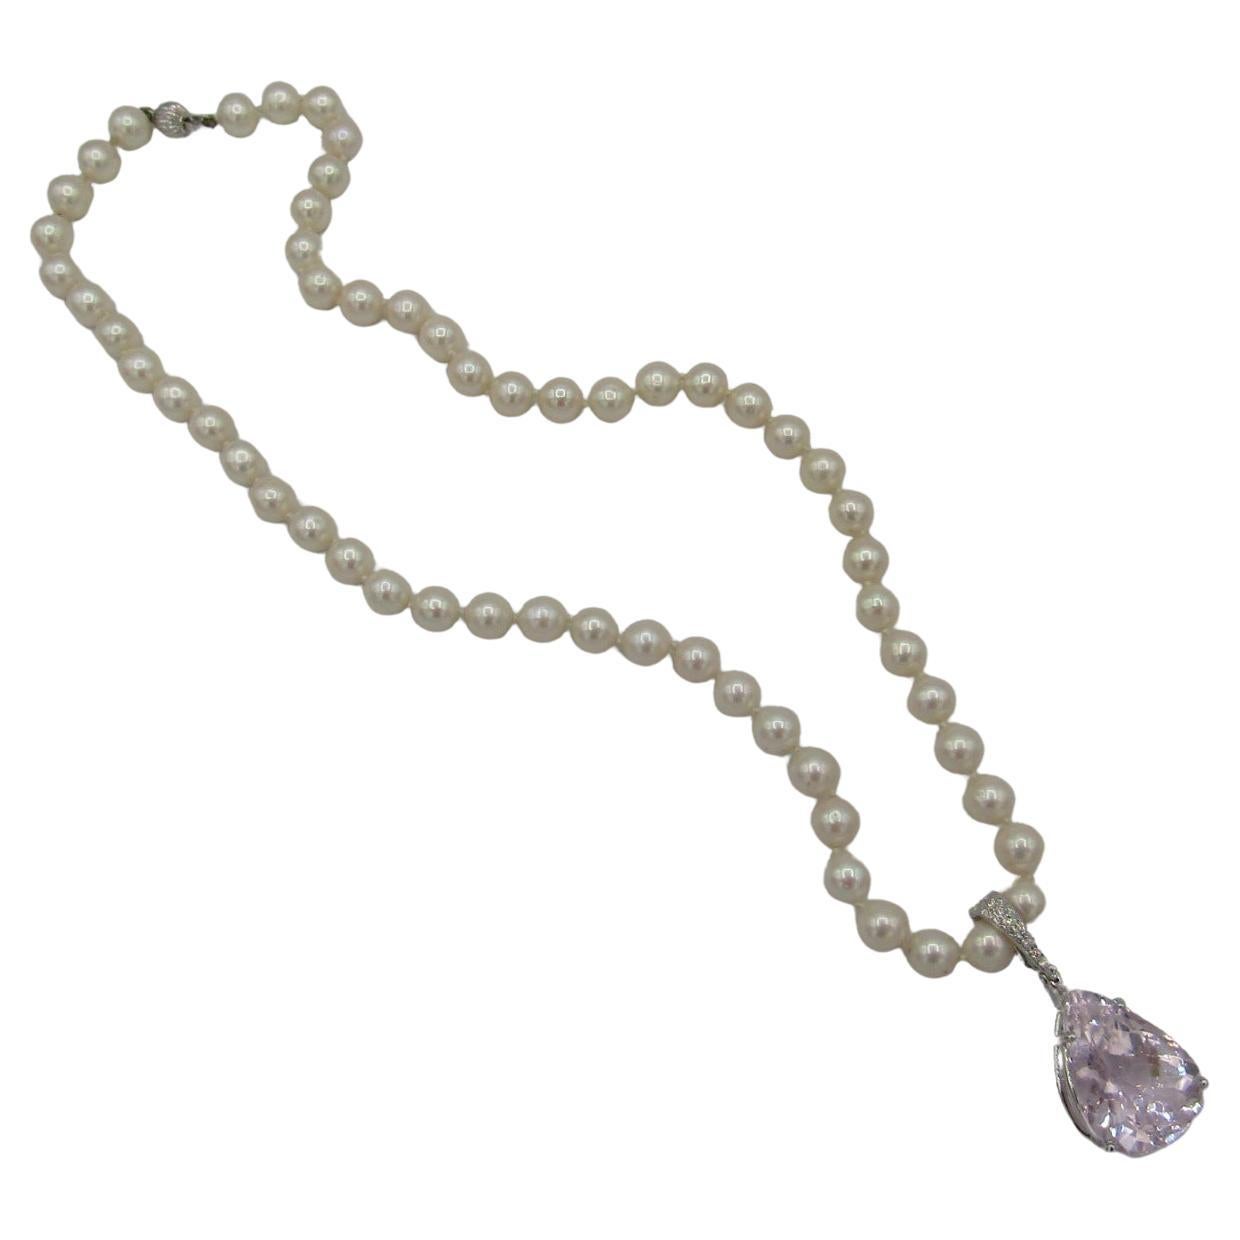 This exquisite pendant by LaFrancee features a beautiful pear-shaped 22.26 carat certified natural Kunzite stone surrounded by seven dazzling diamonds, set in 14k white gold. The pendant is perfect for any occasion, be it a wedding, anniversary,